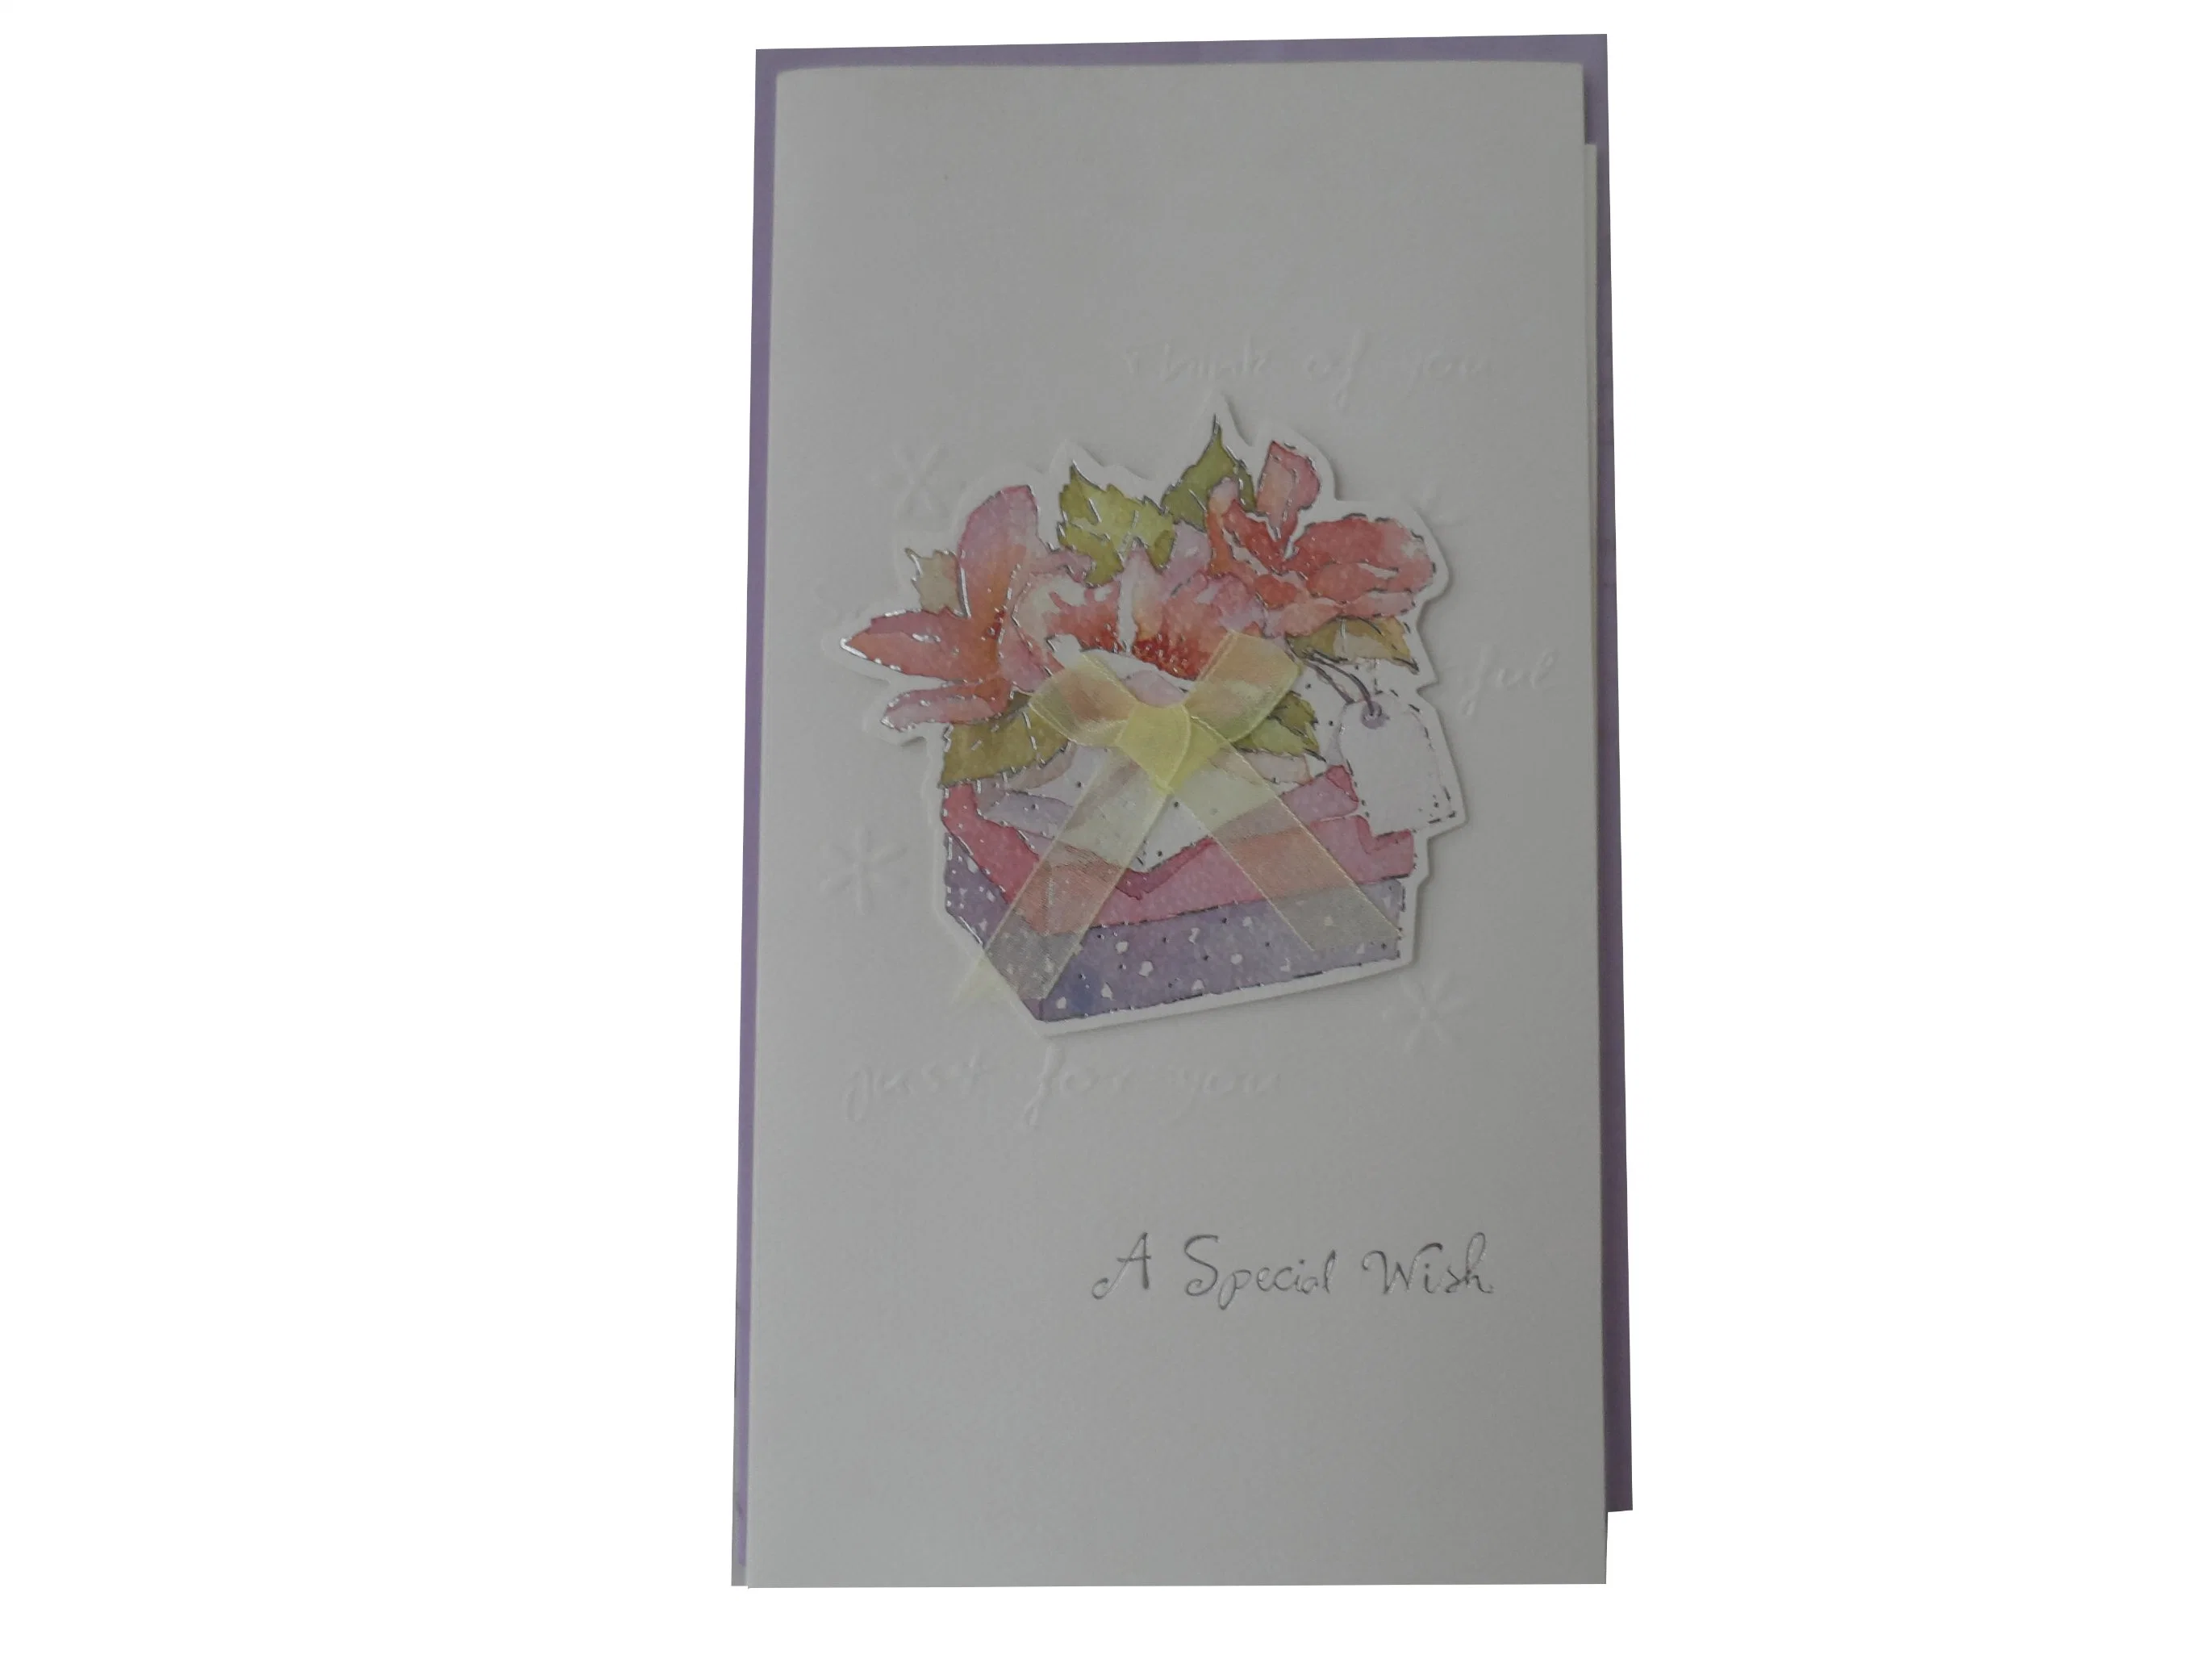 Customized Gift Cards Greeting Card Promotional Various Holiday Cards Printing with OEM Logo